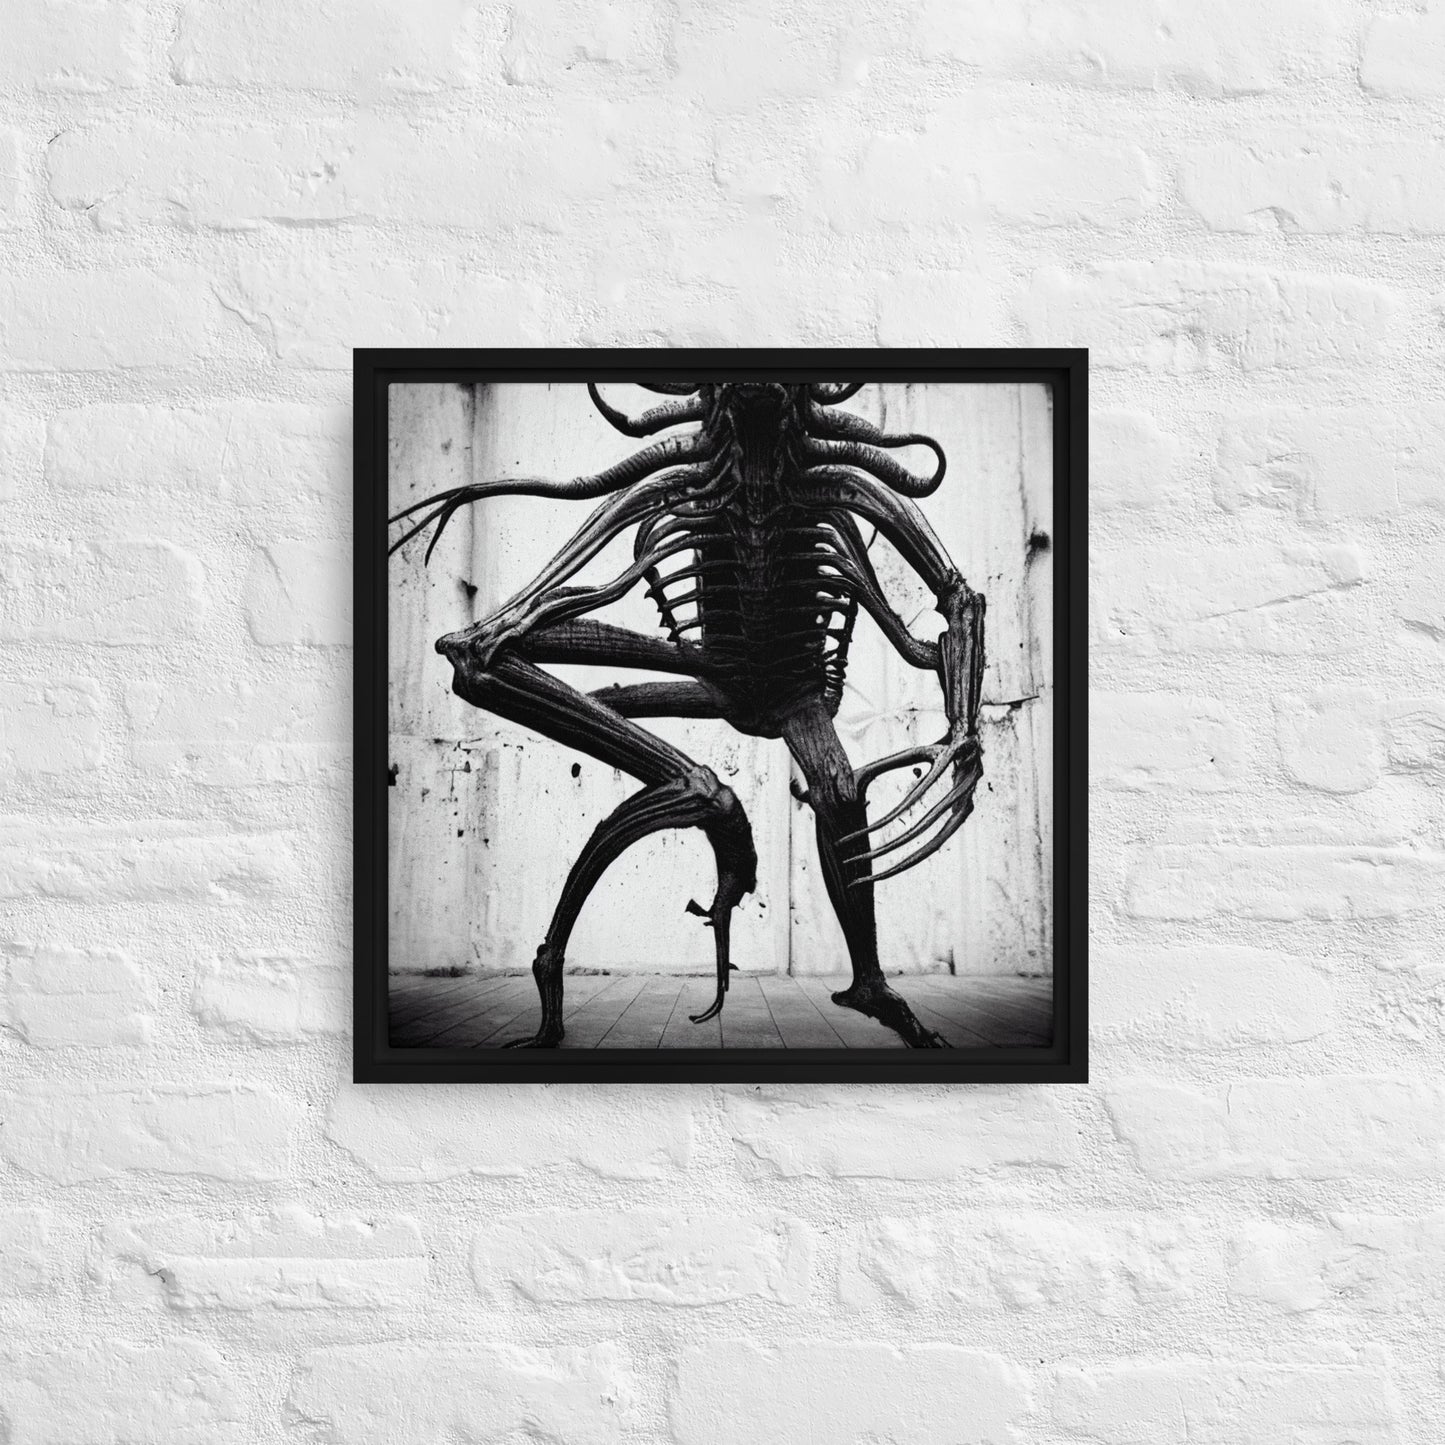 A Lonely Nightmare Asks For One Last Dance - framed art print canvas - 16" x 16"